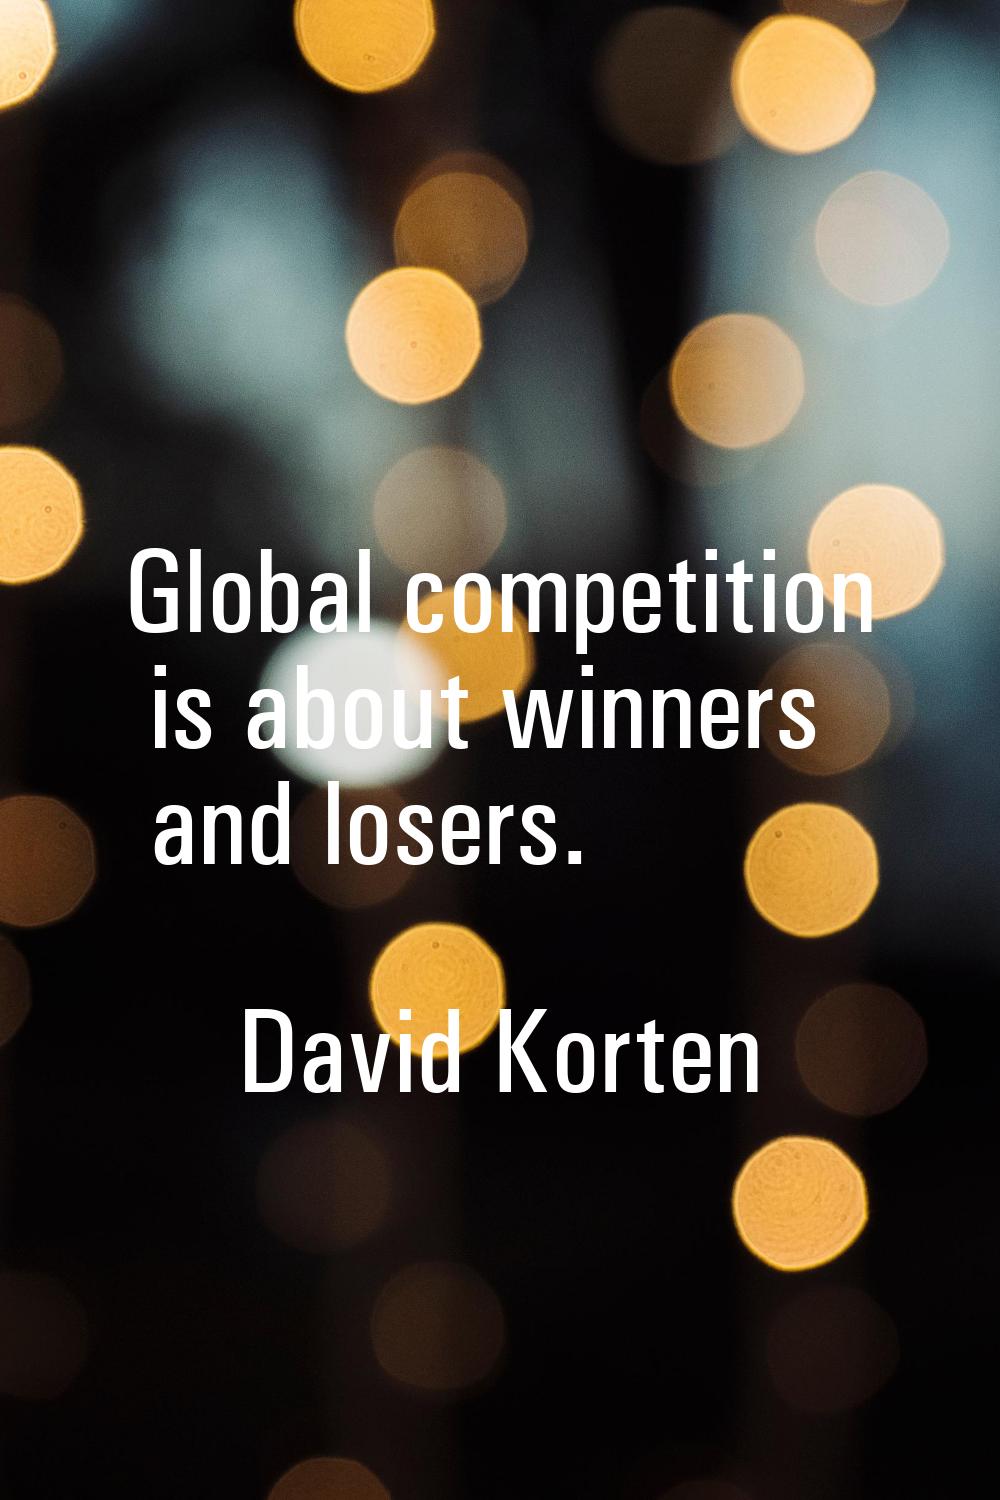 Global competition is about winners and losers.